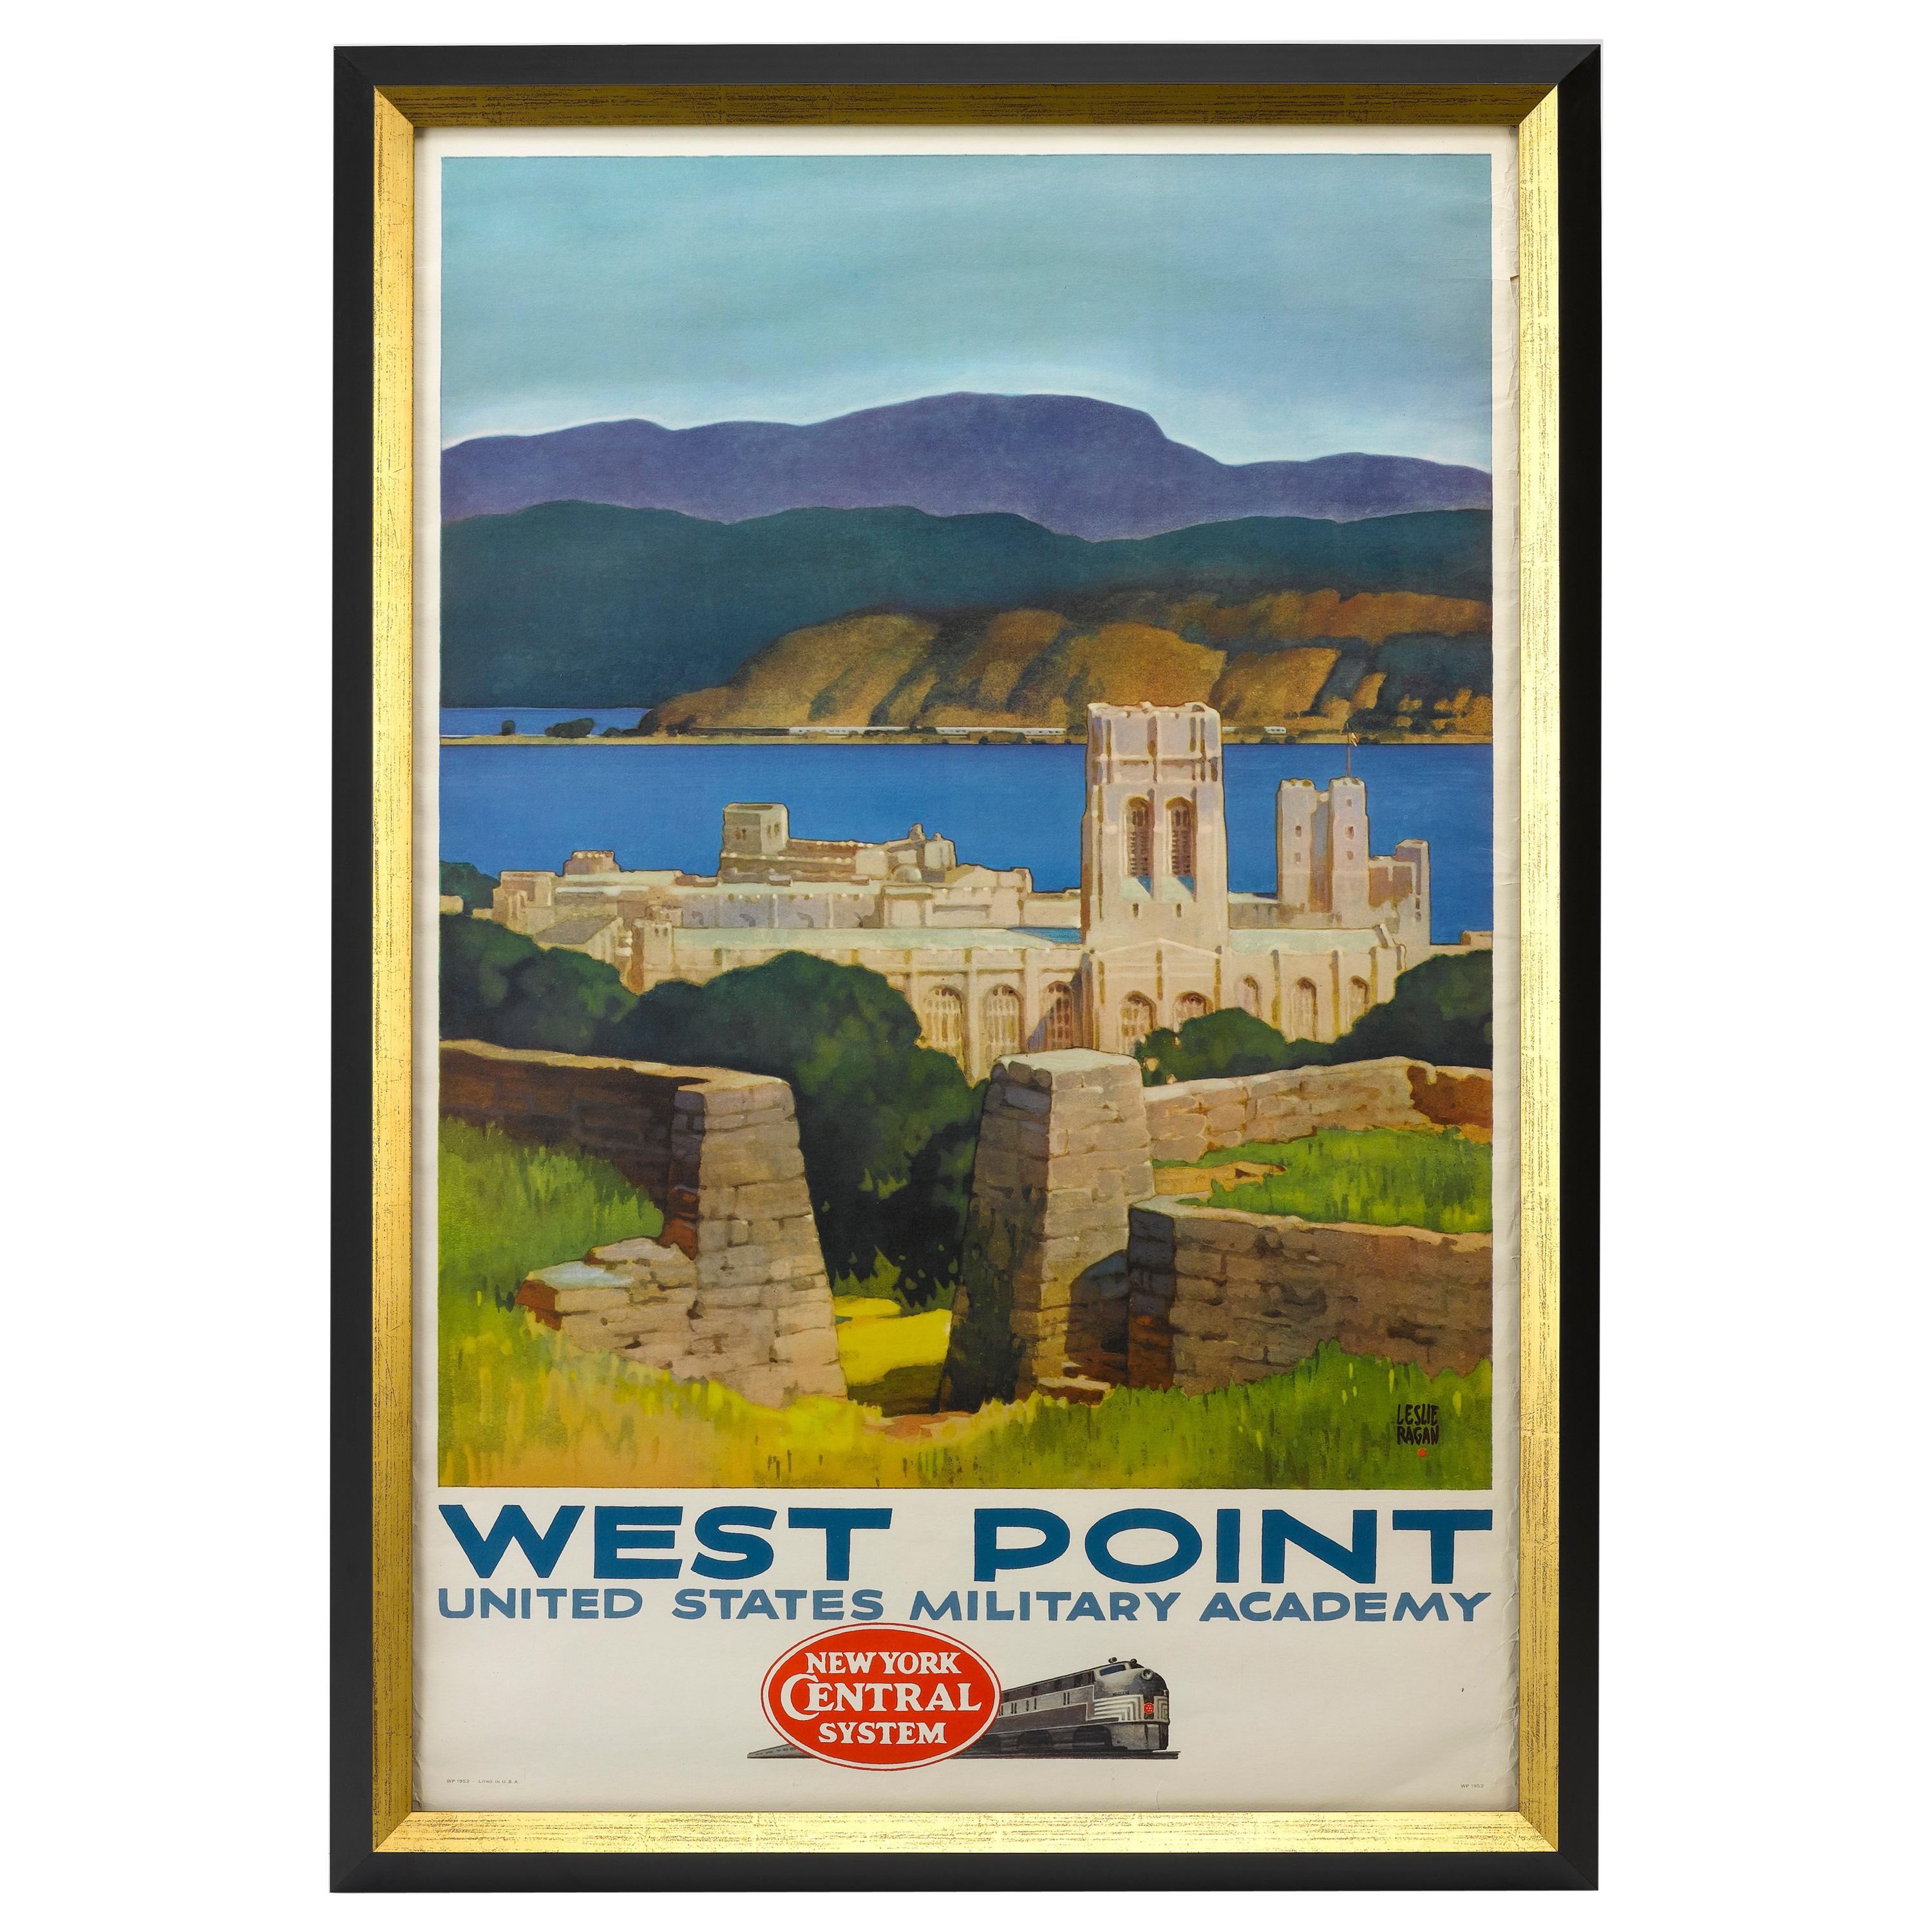 West Point Military Academy Railroad Travel Poster by Leslie Ragan, 1952